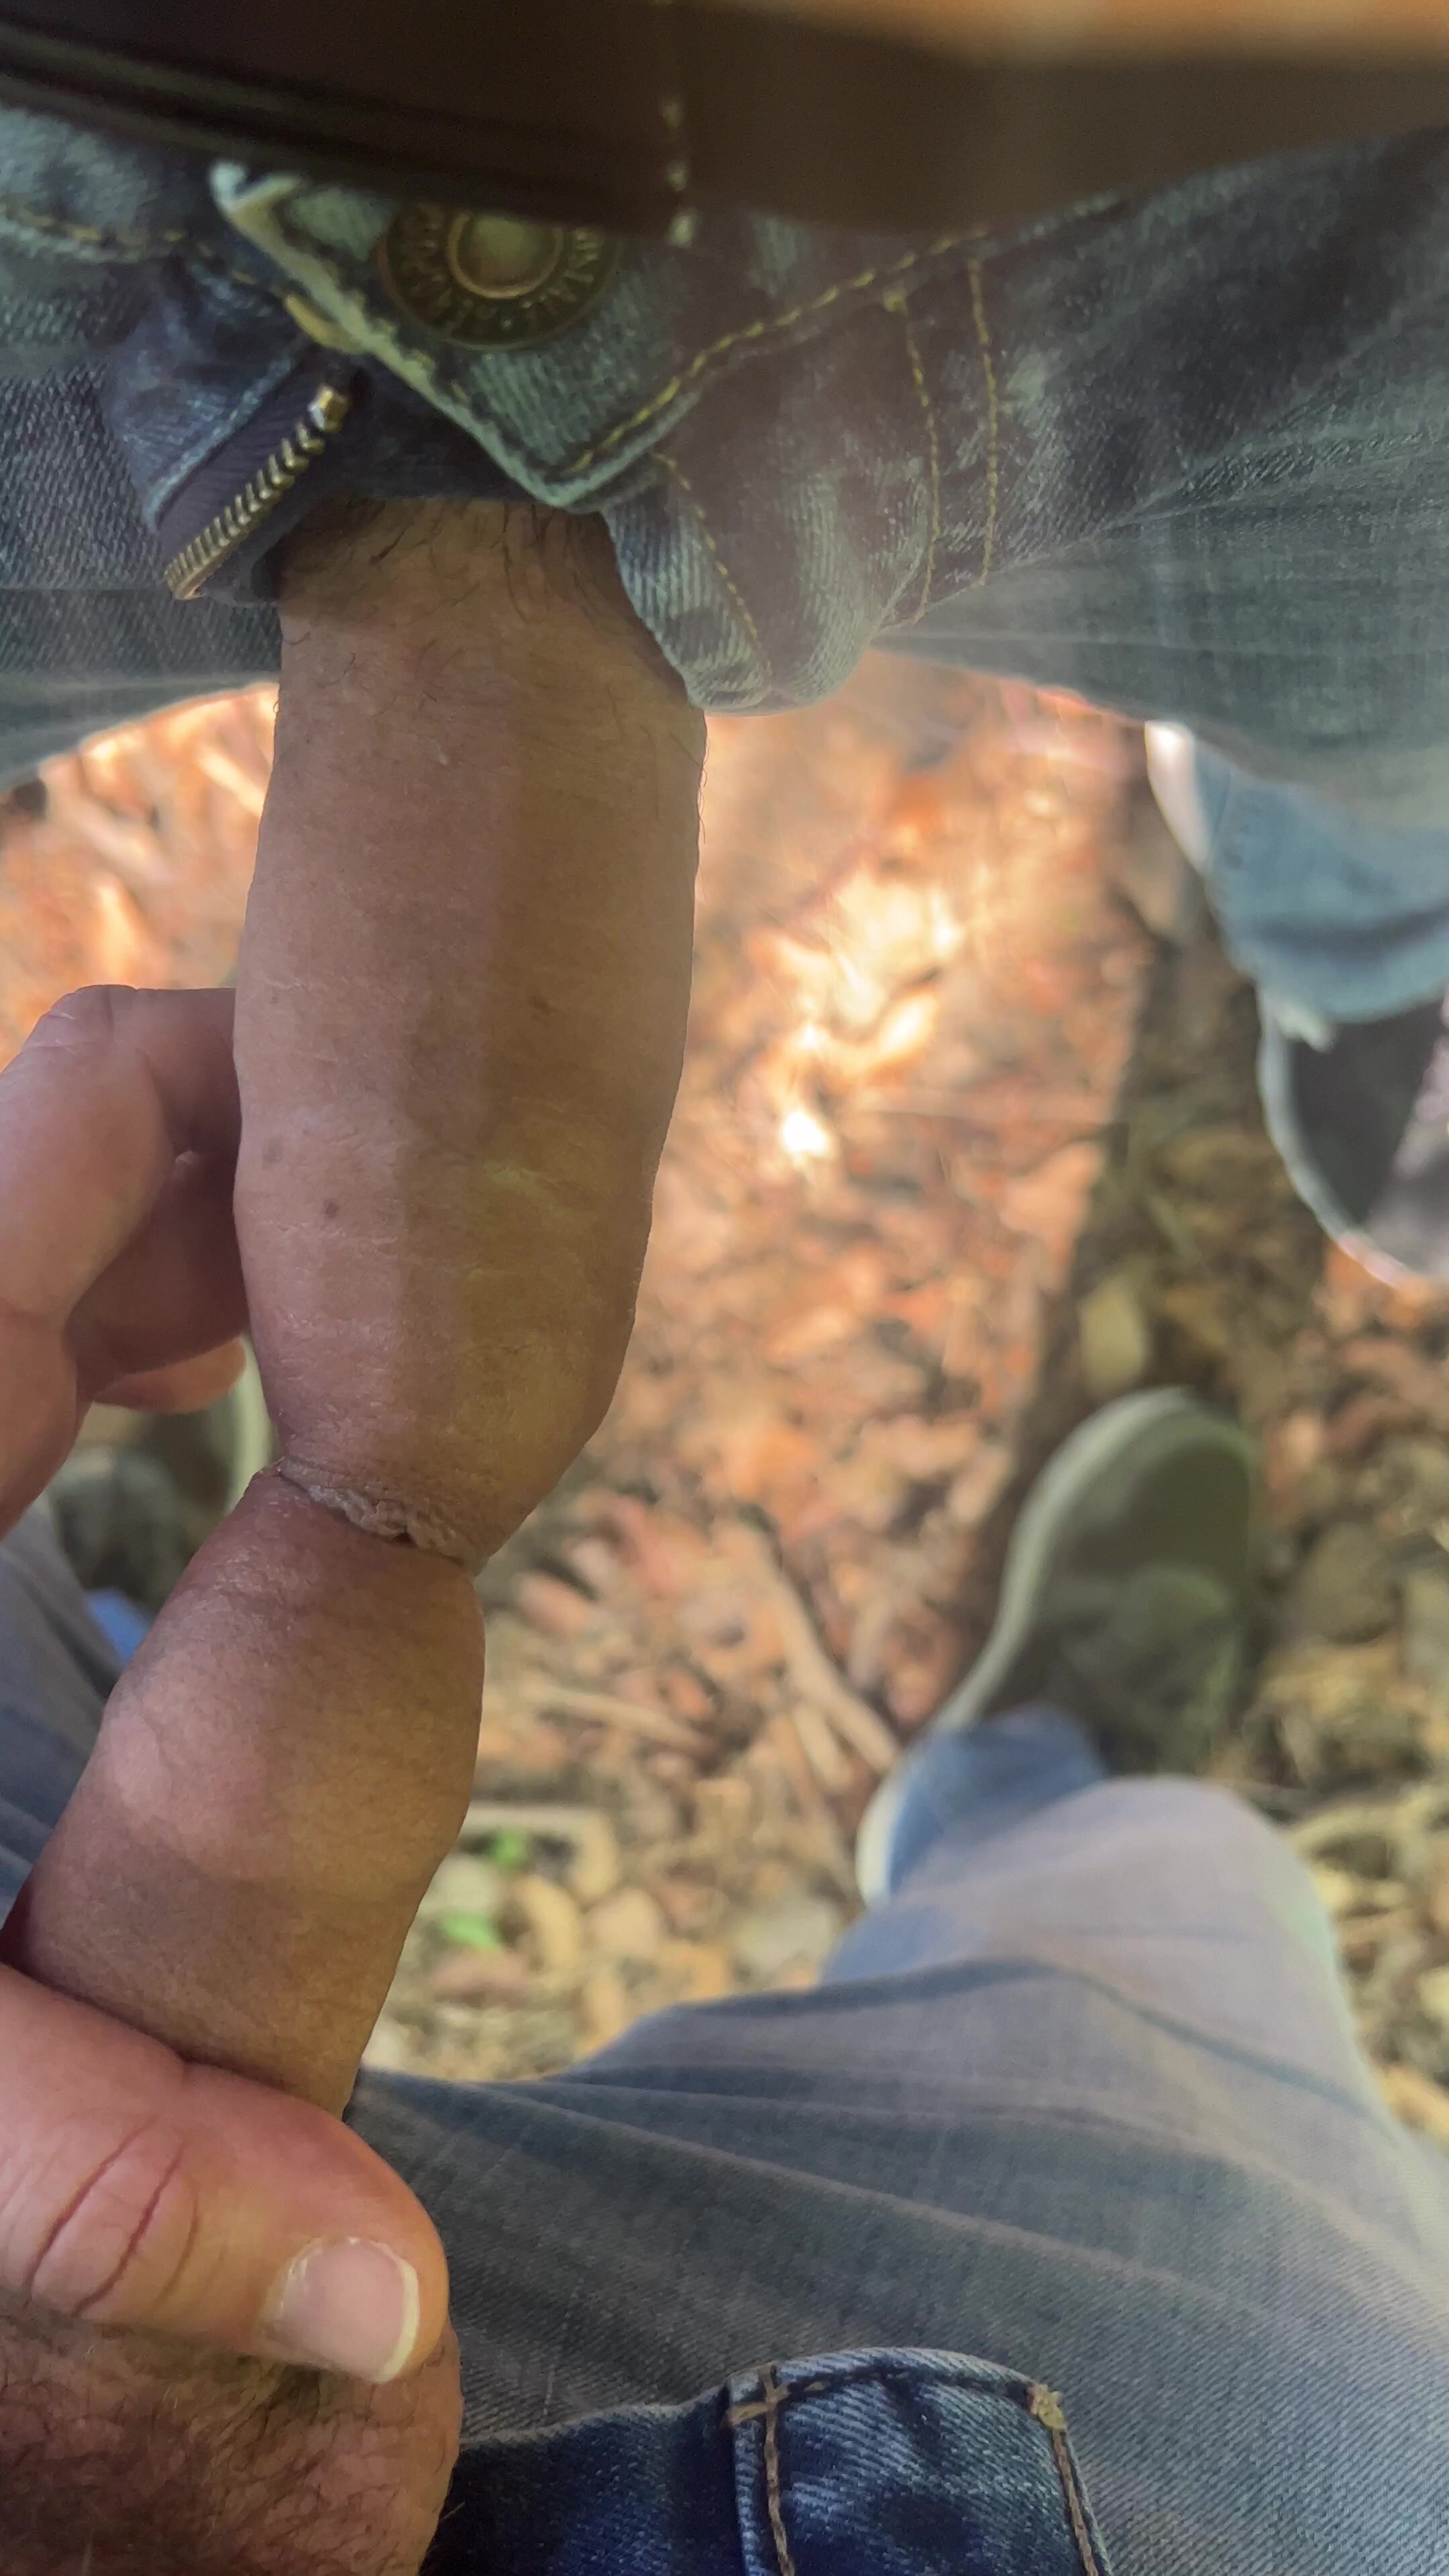 Two dads dock their dicks in the woods